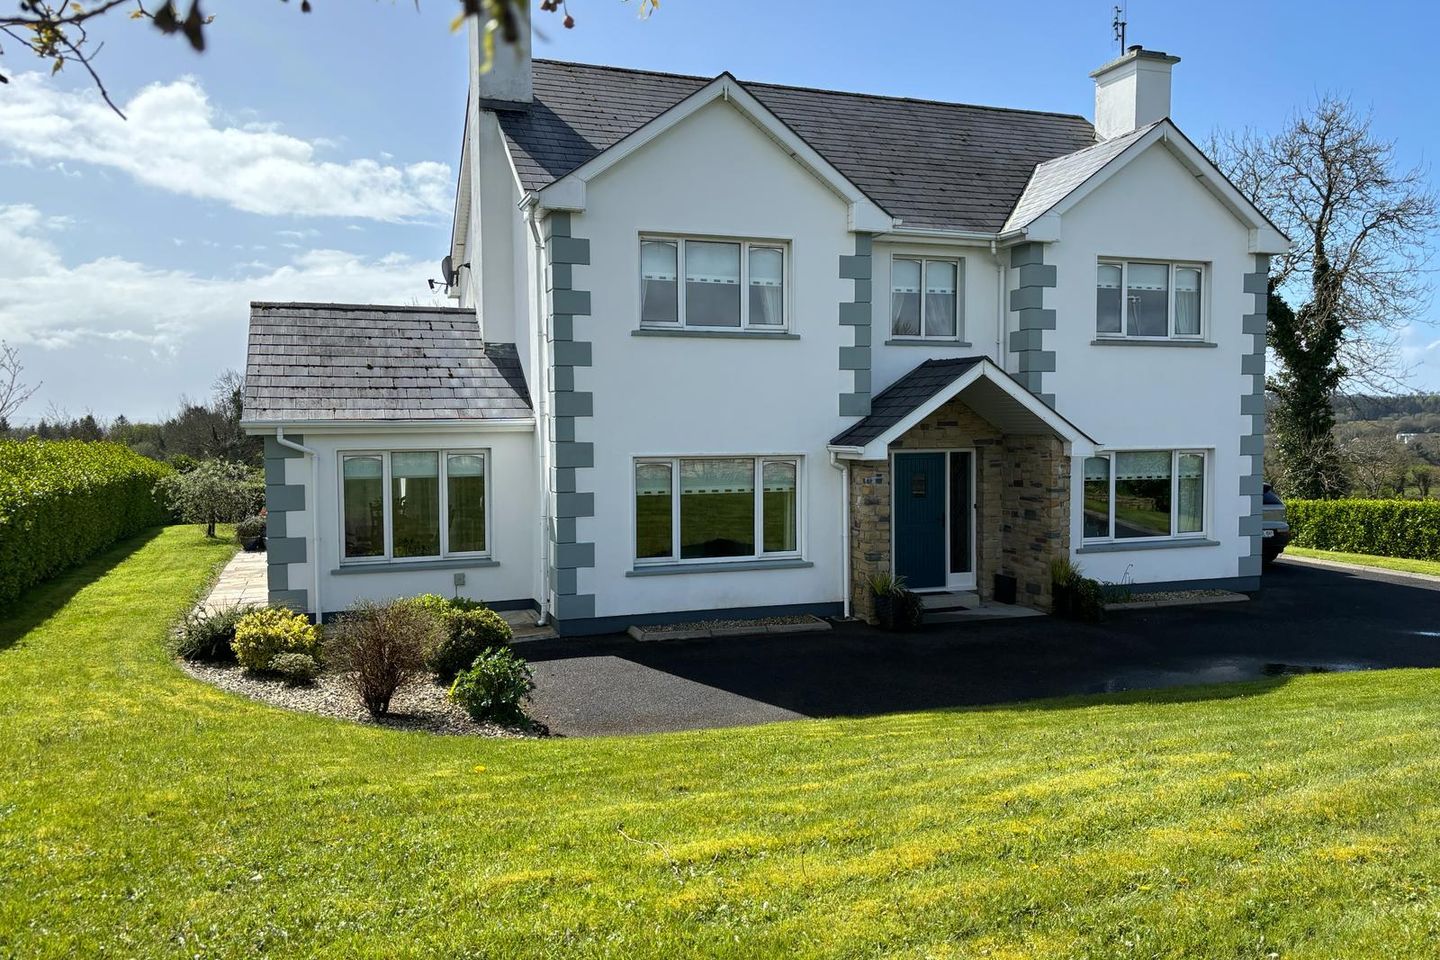 8 Doonan, Donegal Town, Co. Donegal, F94A3T1